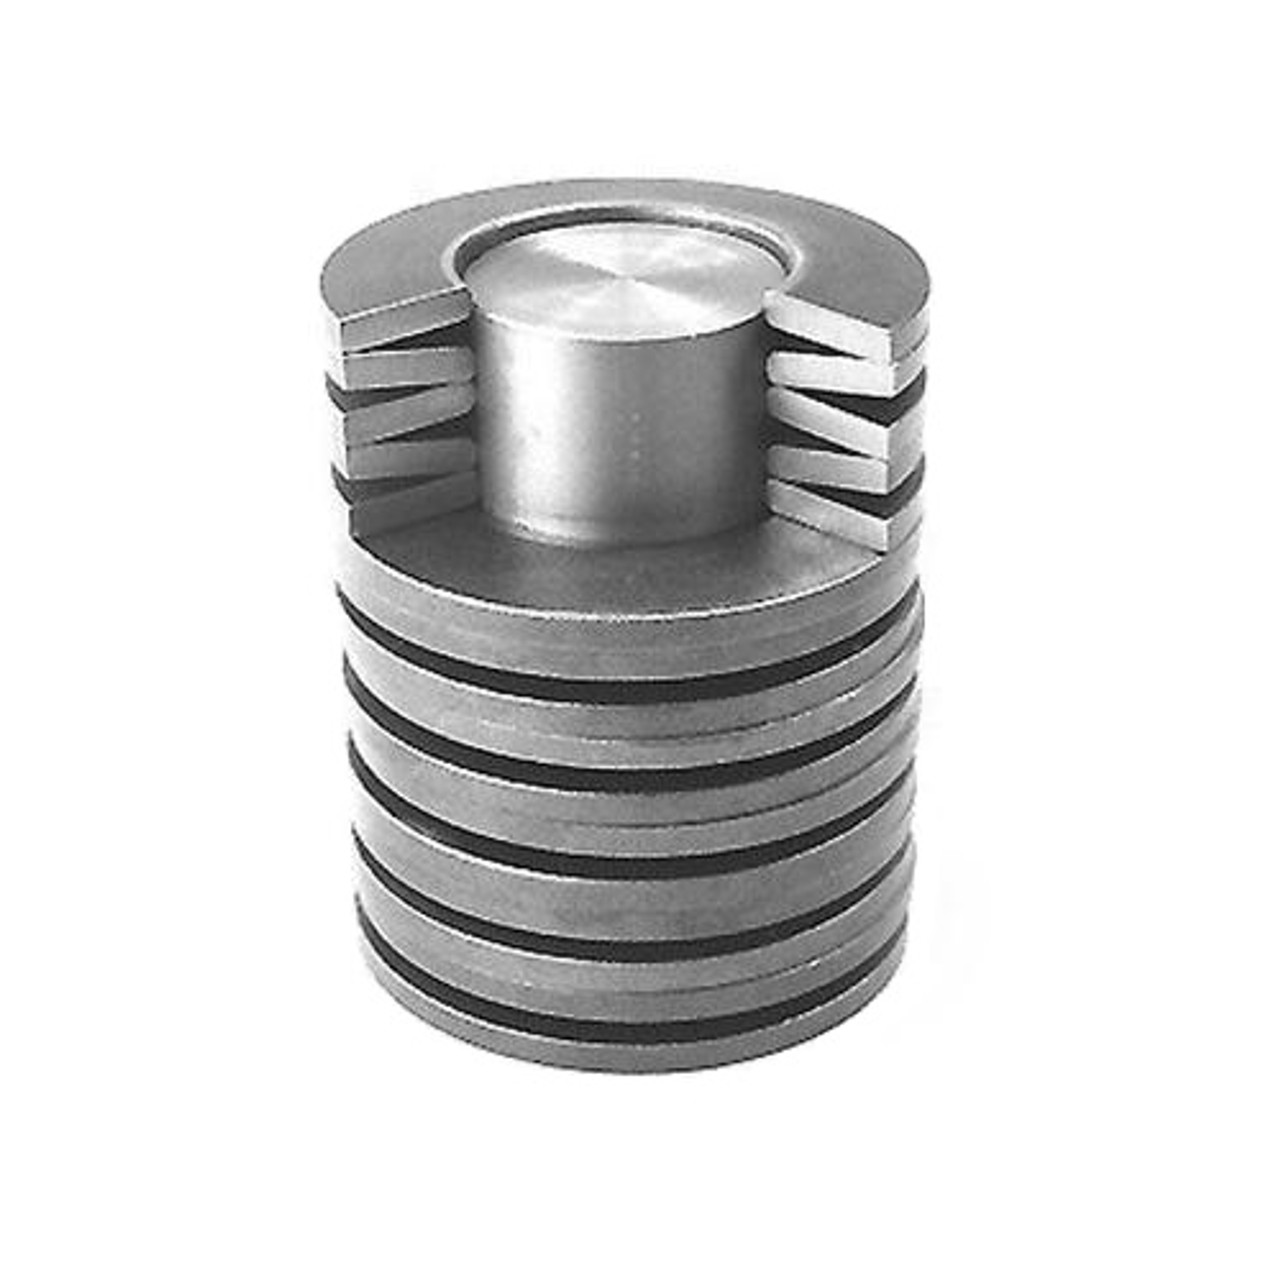 25mm Disc Spring (DIN 2093) Conical Washer  DS025.5-060-03